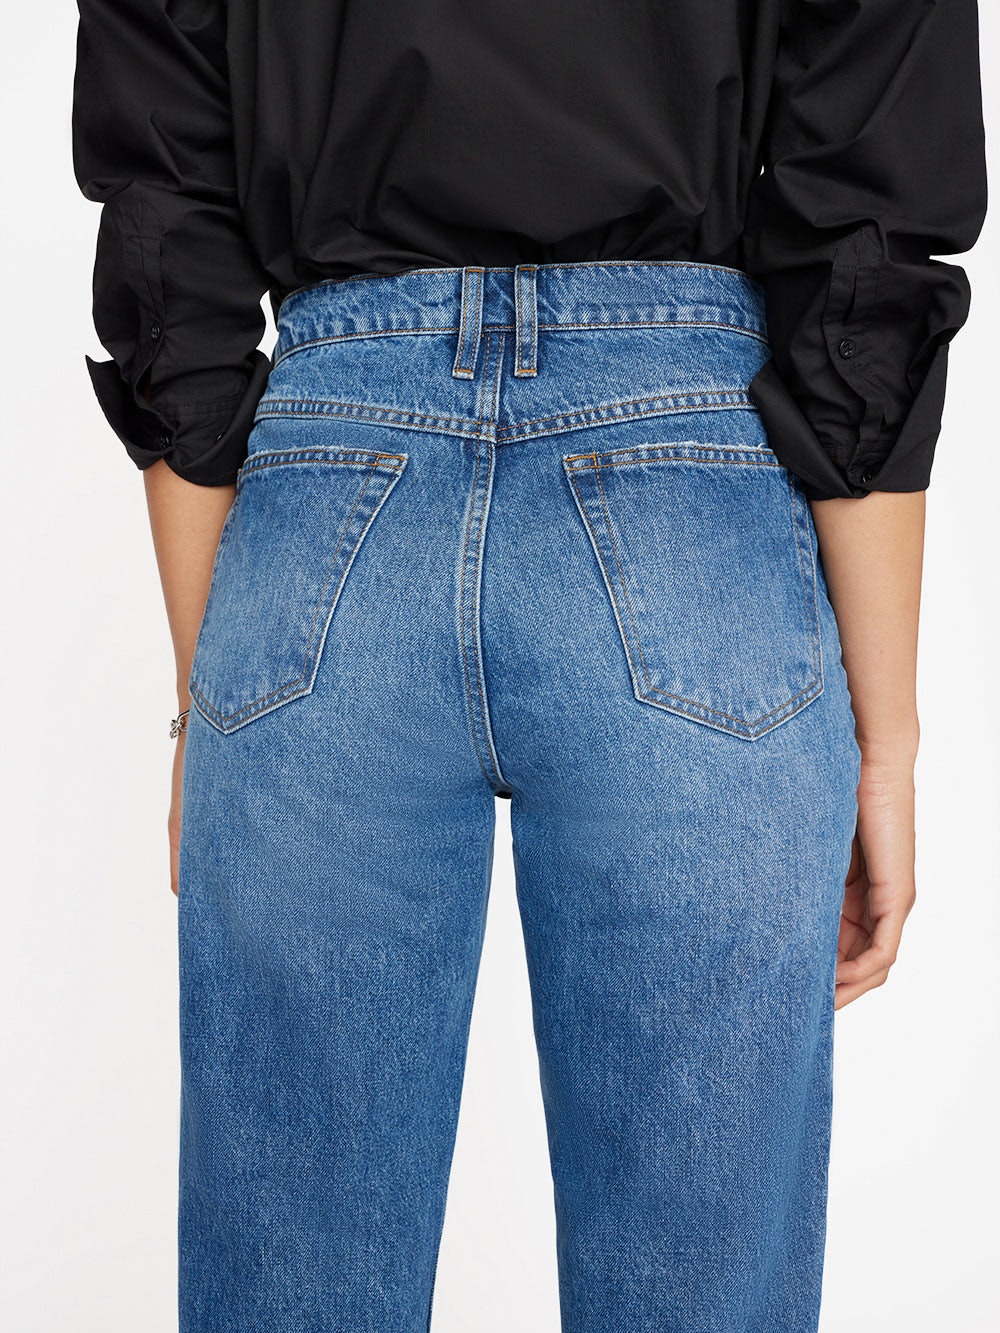 The back view of a woman in Le High 'N' Tight Taper - Stearnlee denim jeans by Frame.